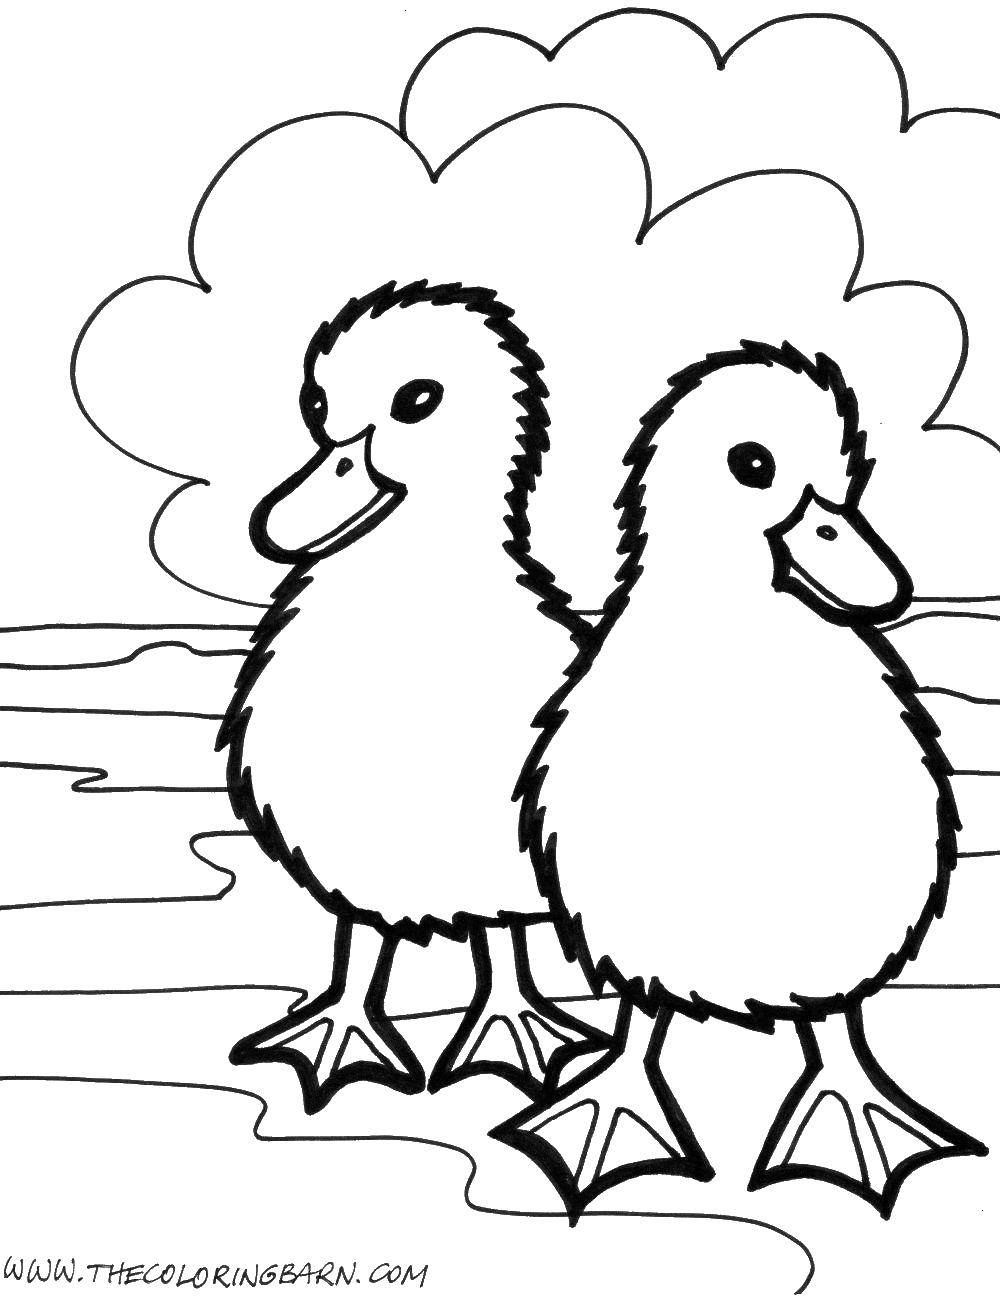 Coloring Two fluffy chicken. Category birds. Tags:  birds, chickens.